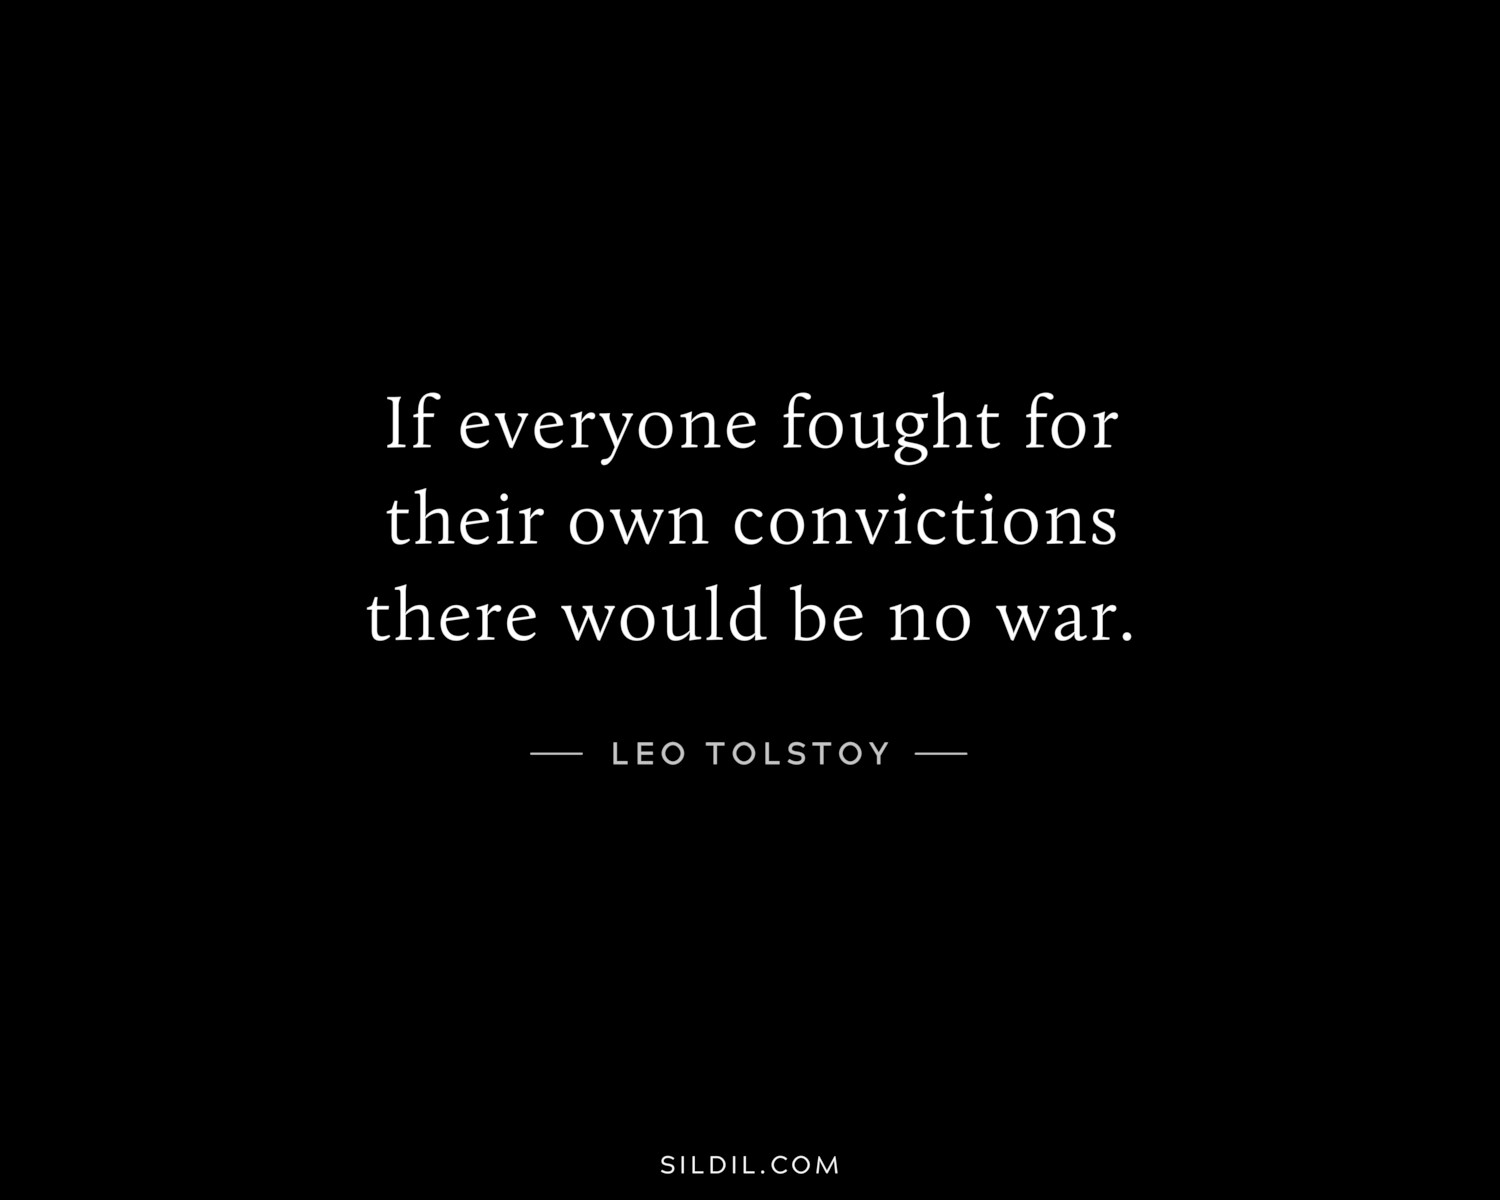 If everyone fought for their own convictions there would be no war.